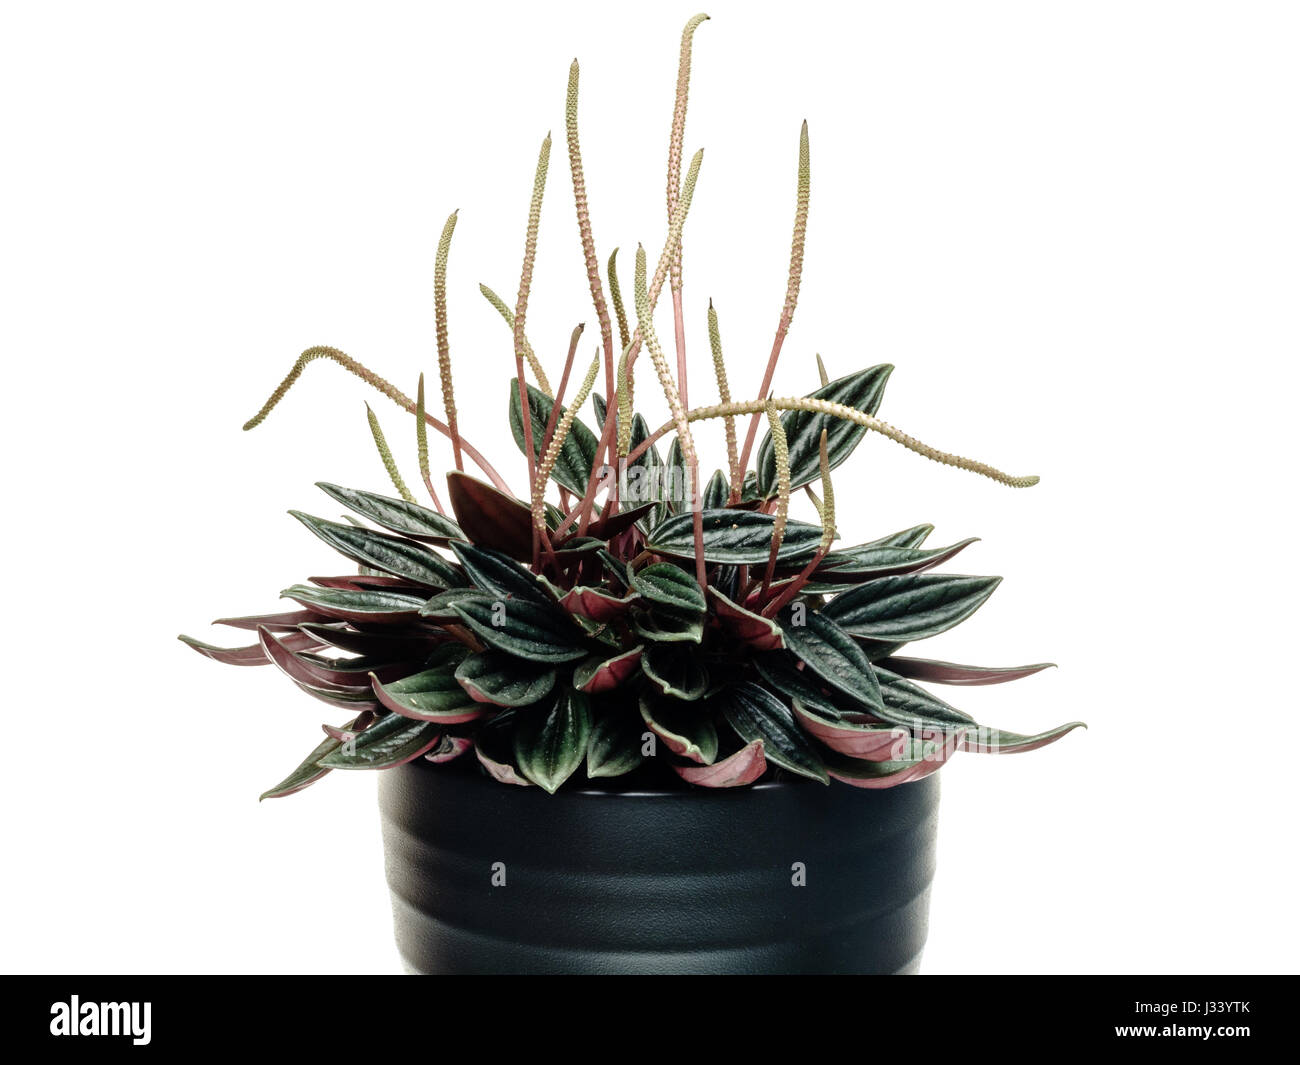 The Peperomia caperata is a semi-succulent plant with a rosette of dark grooved leaves and tall unusual flowers known as 'rats tails'. Stock Photo